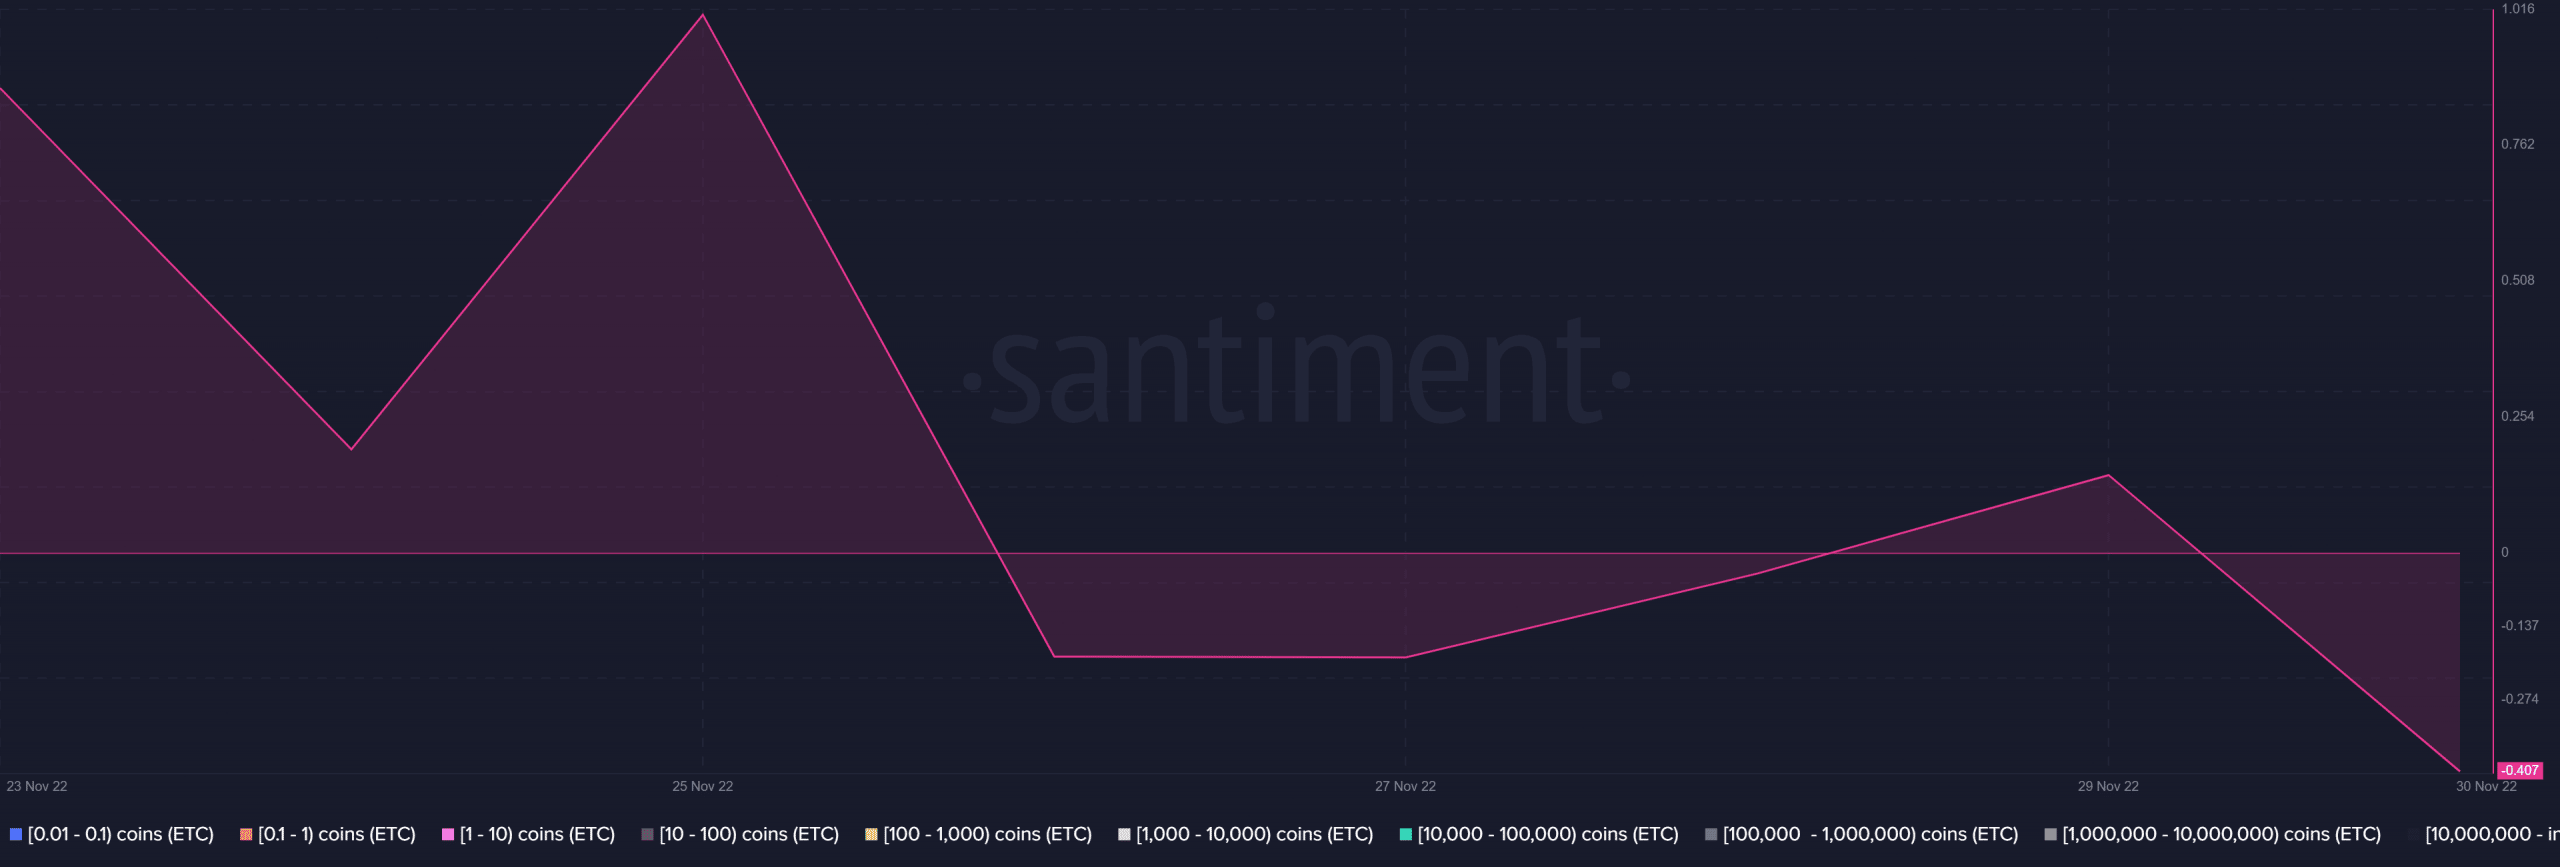 Ethereum Classic weighted sentiment